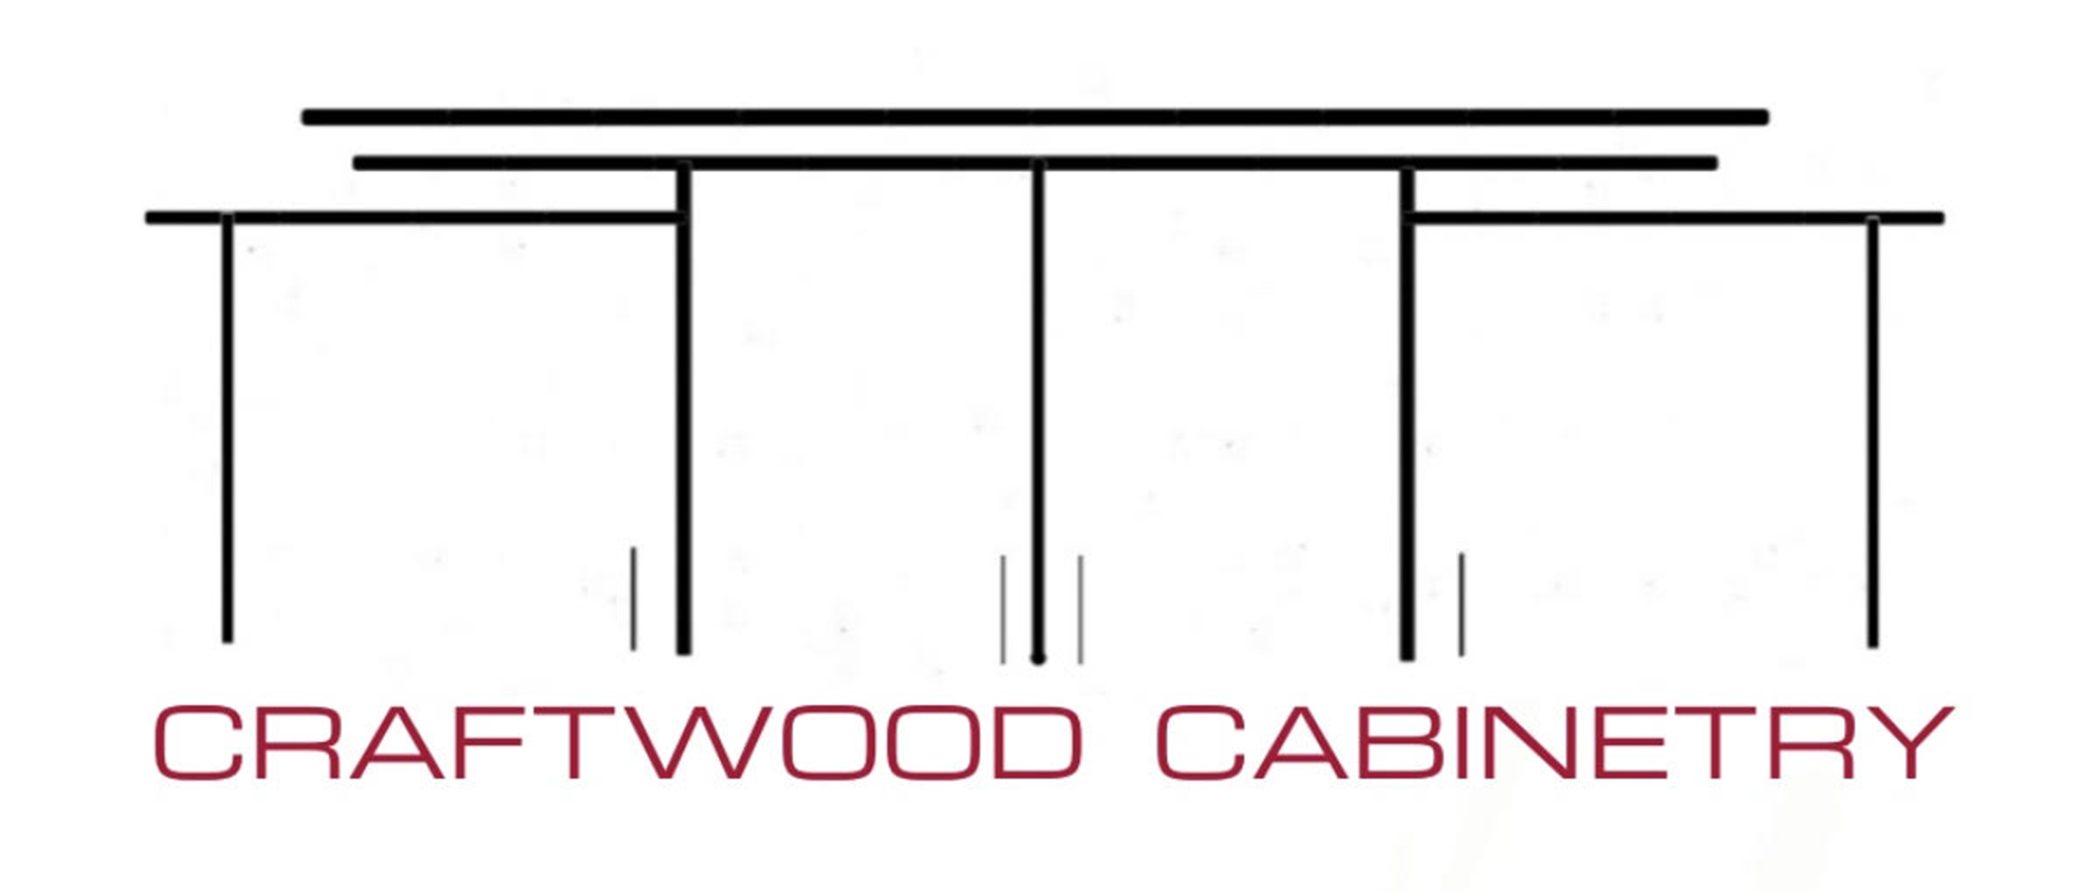 Craftwood Cabinetry